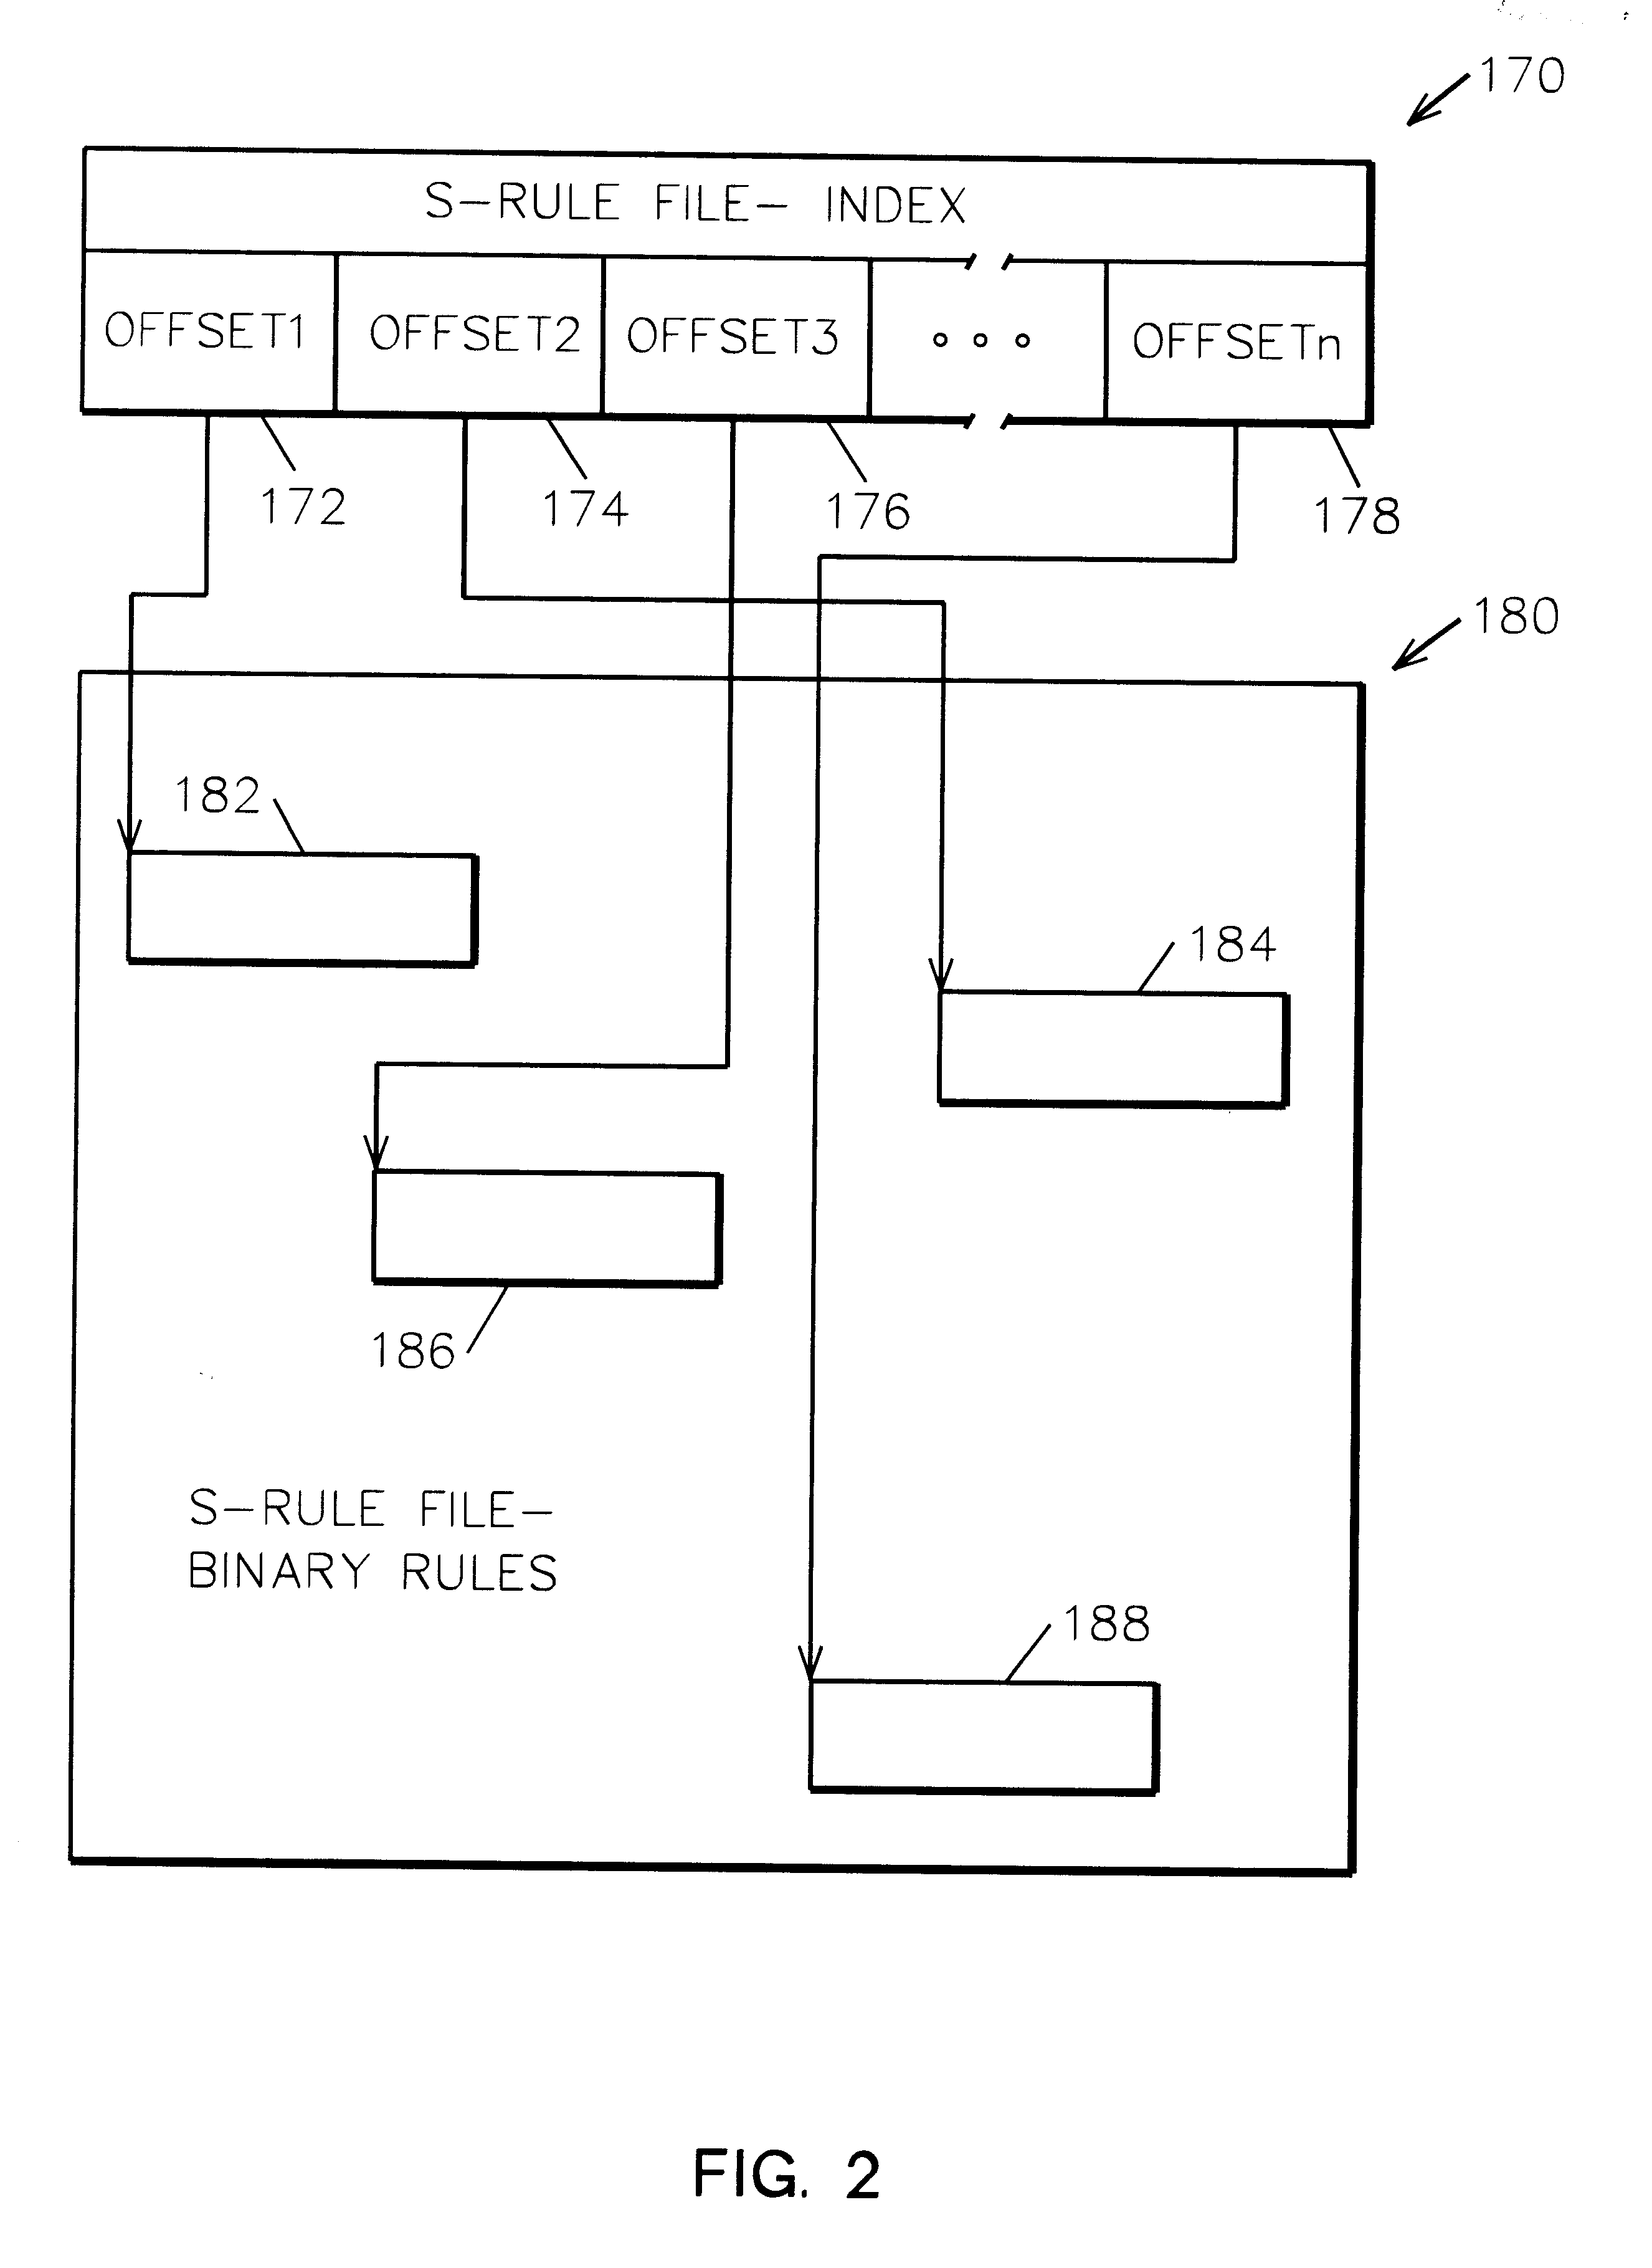 System and method for IP network address translation and IP filtering with dynamic address resolution